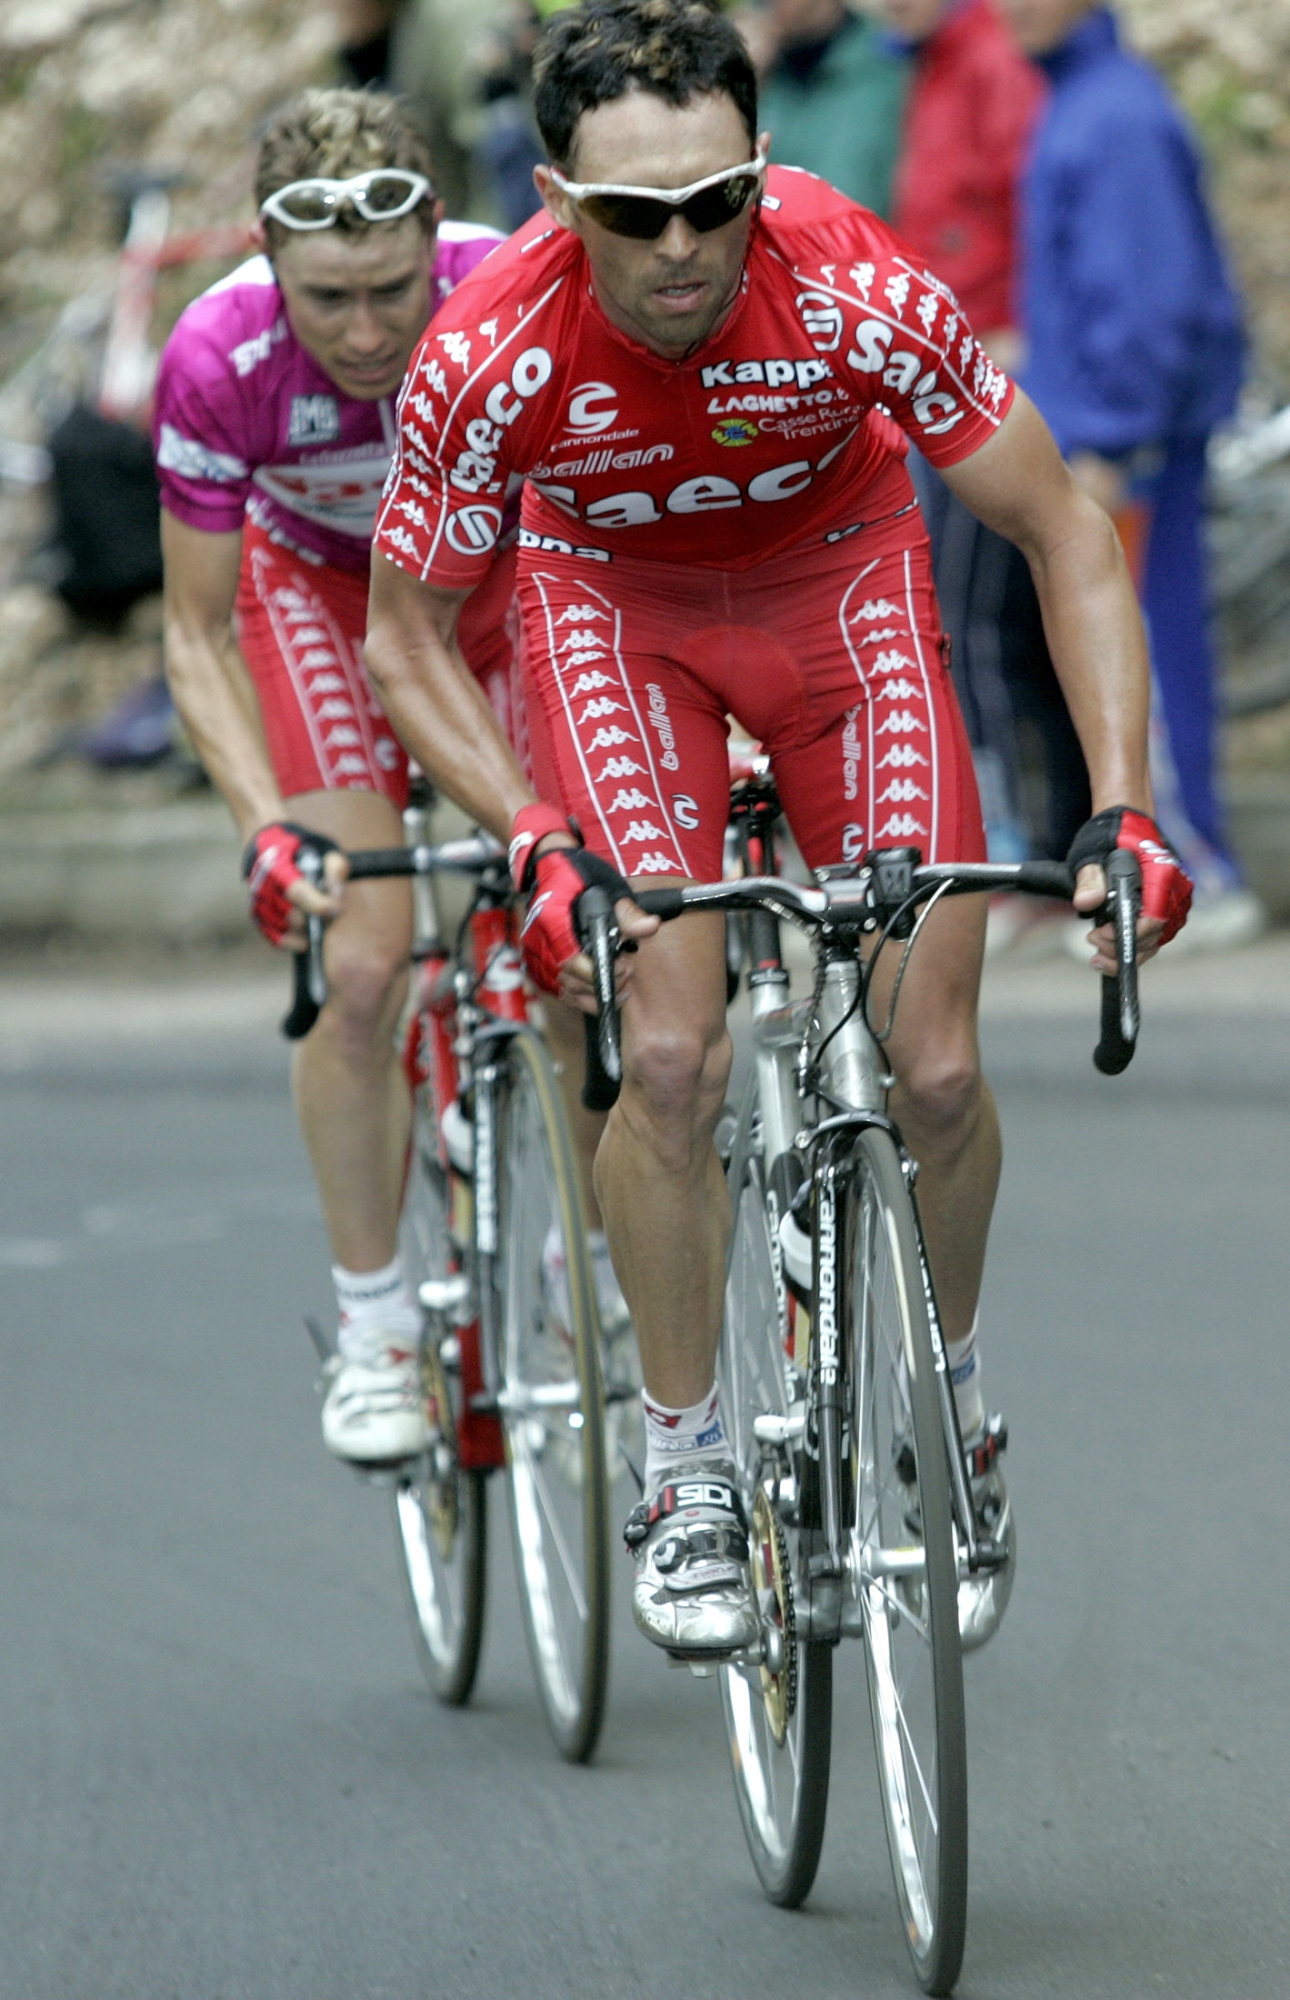 2003 Giro winner, Italian favourite cyclist Gilberto Simoni (Team Saeco/Ita) (R) with teammate Damiano Cunego (L) in action two kilometers before the finish line during the third stage of the 87th Giro between Pontromeli and Corno alle Scale 11 May 2004. Simoni won the stage and took the pink jersey. AFP PHOTO DAMIEN MEYER